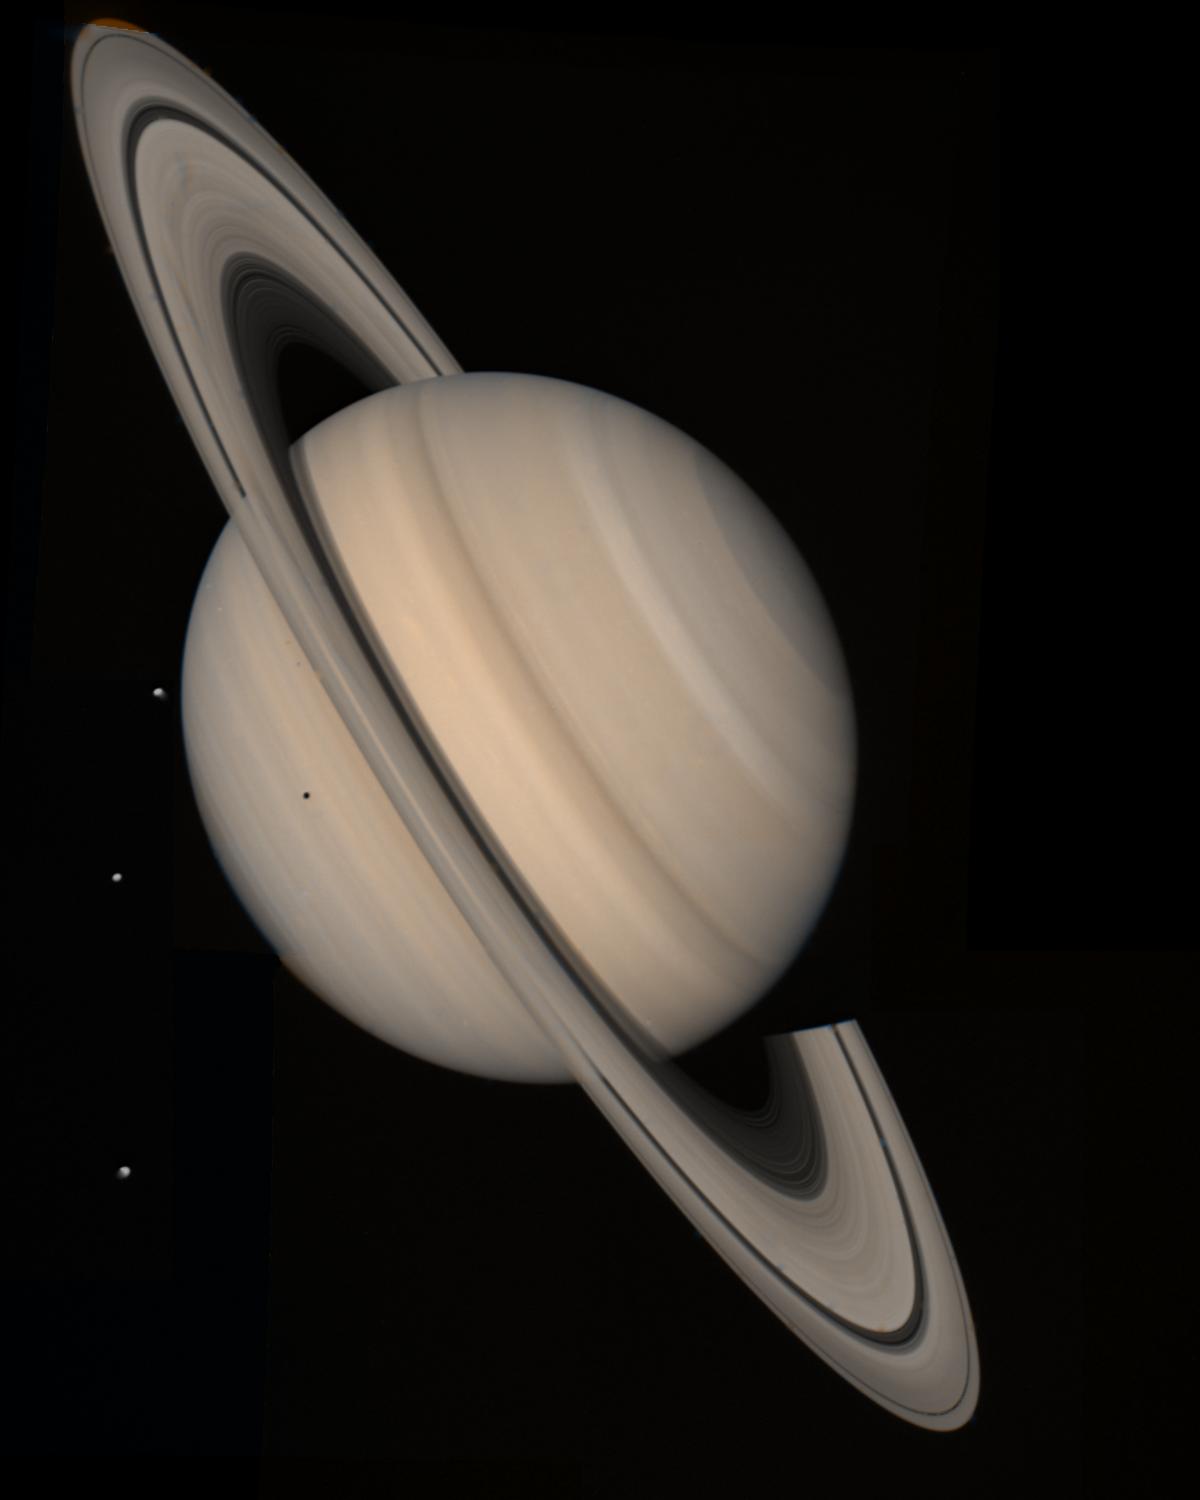 This Voyager 2 image of Saturn was acquired on Aug. 4, 1981, from a distance of 21 million kilometers (13 million miles).